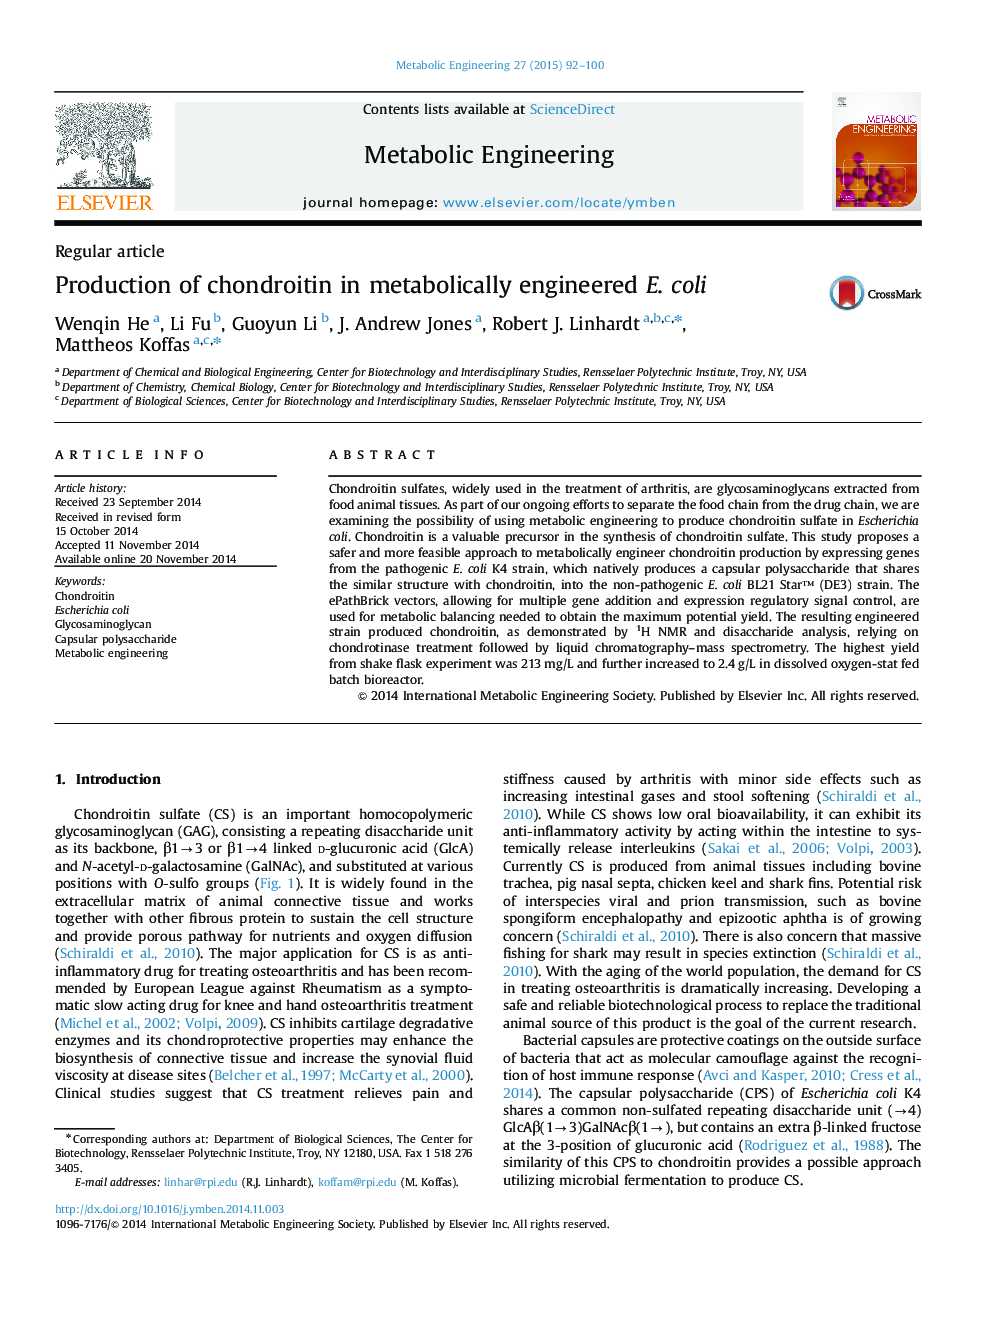 Production of chondroitin in metabolically engineered E. coli